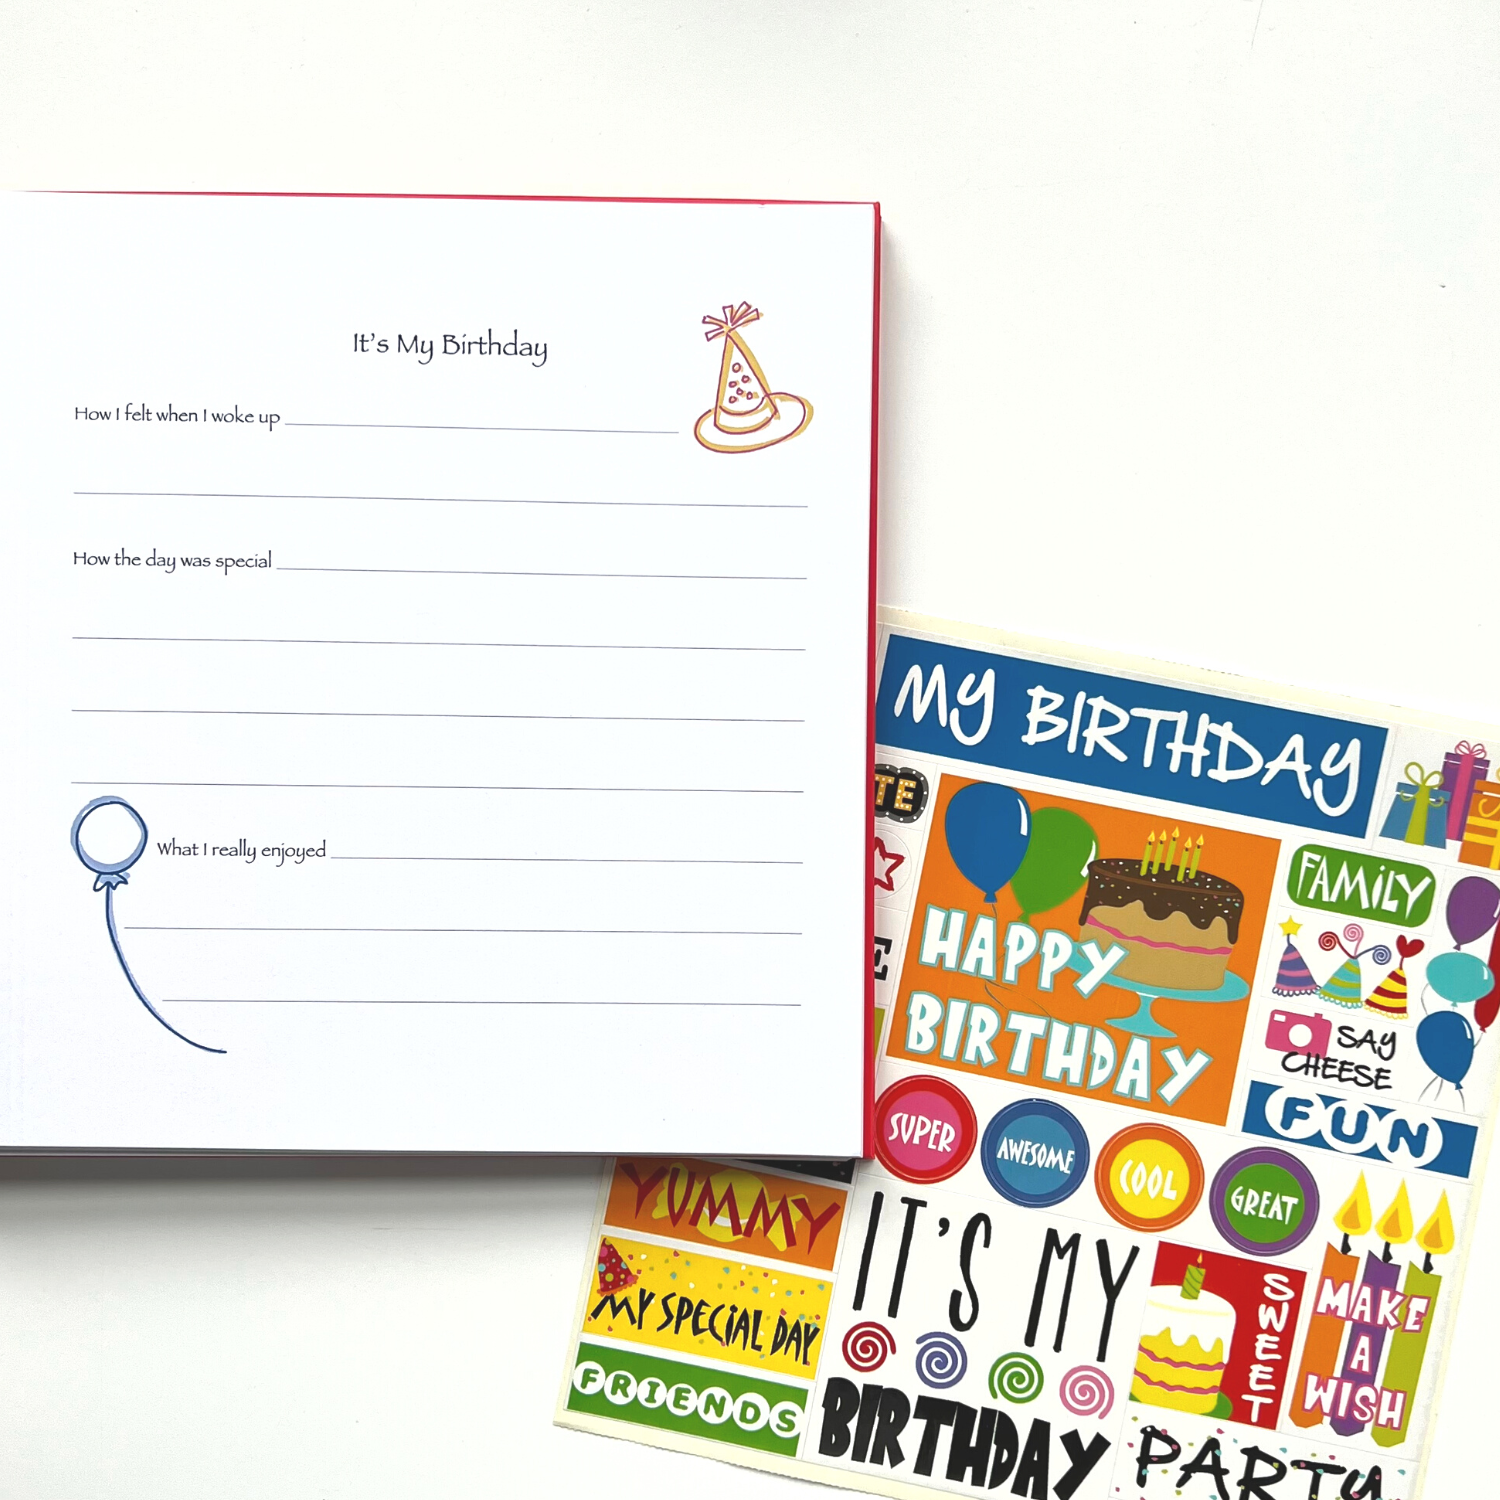 Birthday Journal with open page and sticker sheet